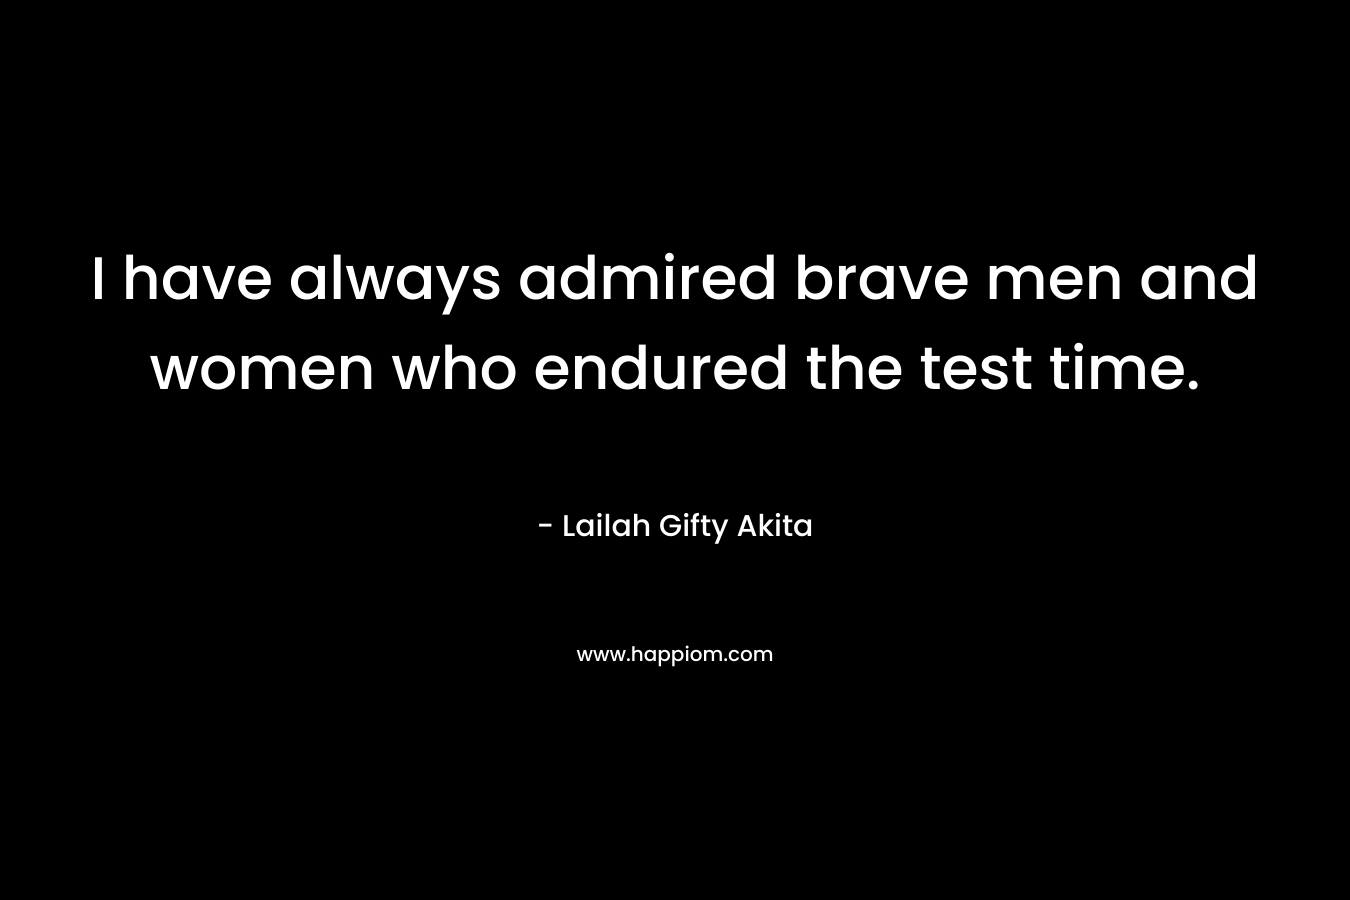 I have always admired brave men and women who endured the test time. – Lailah Gifty Akita